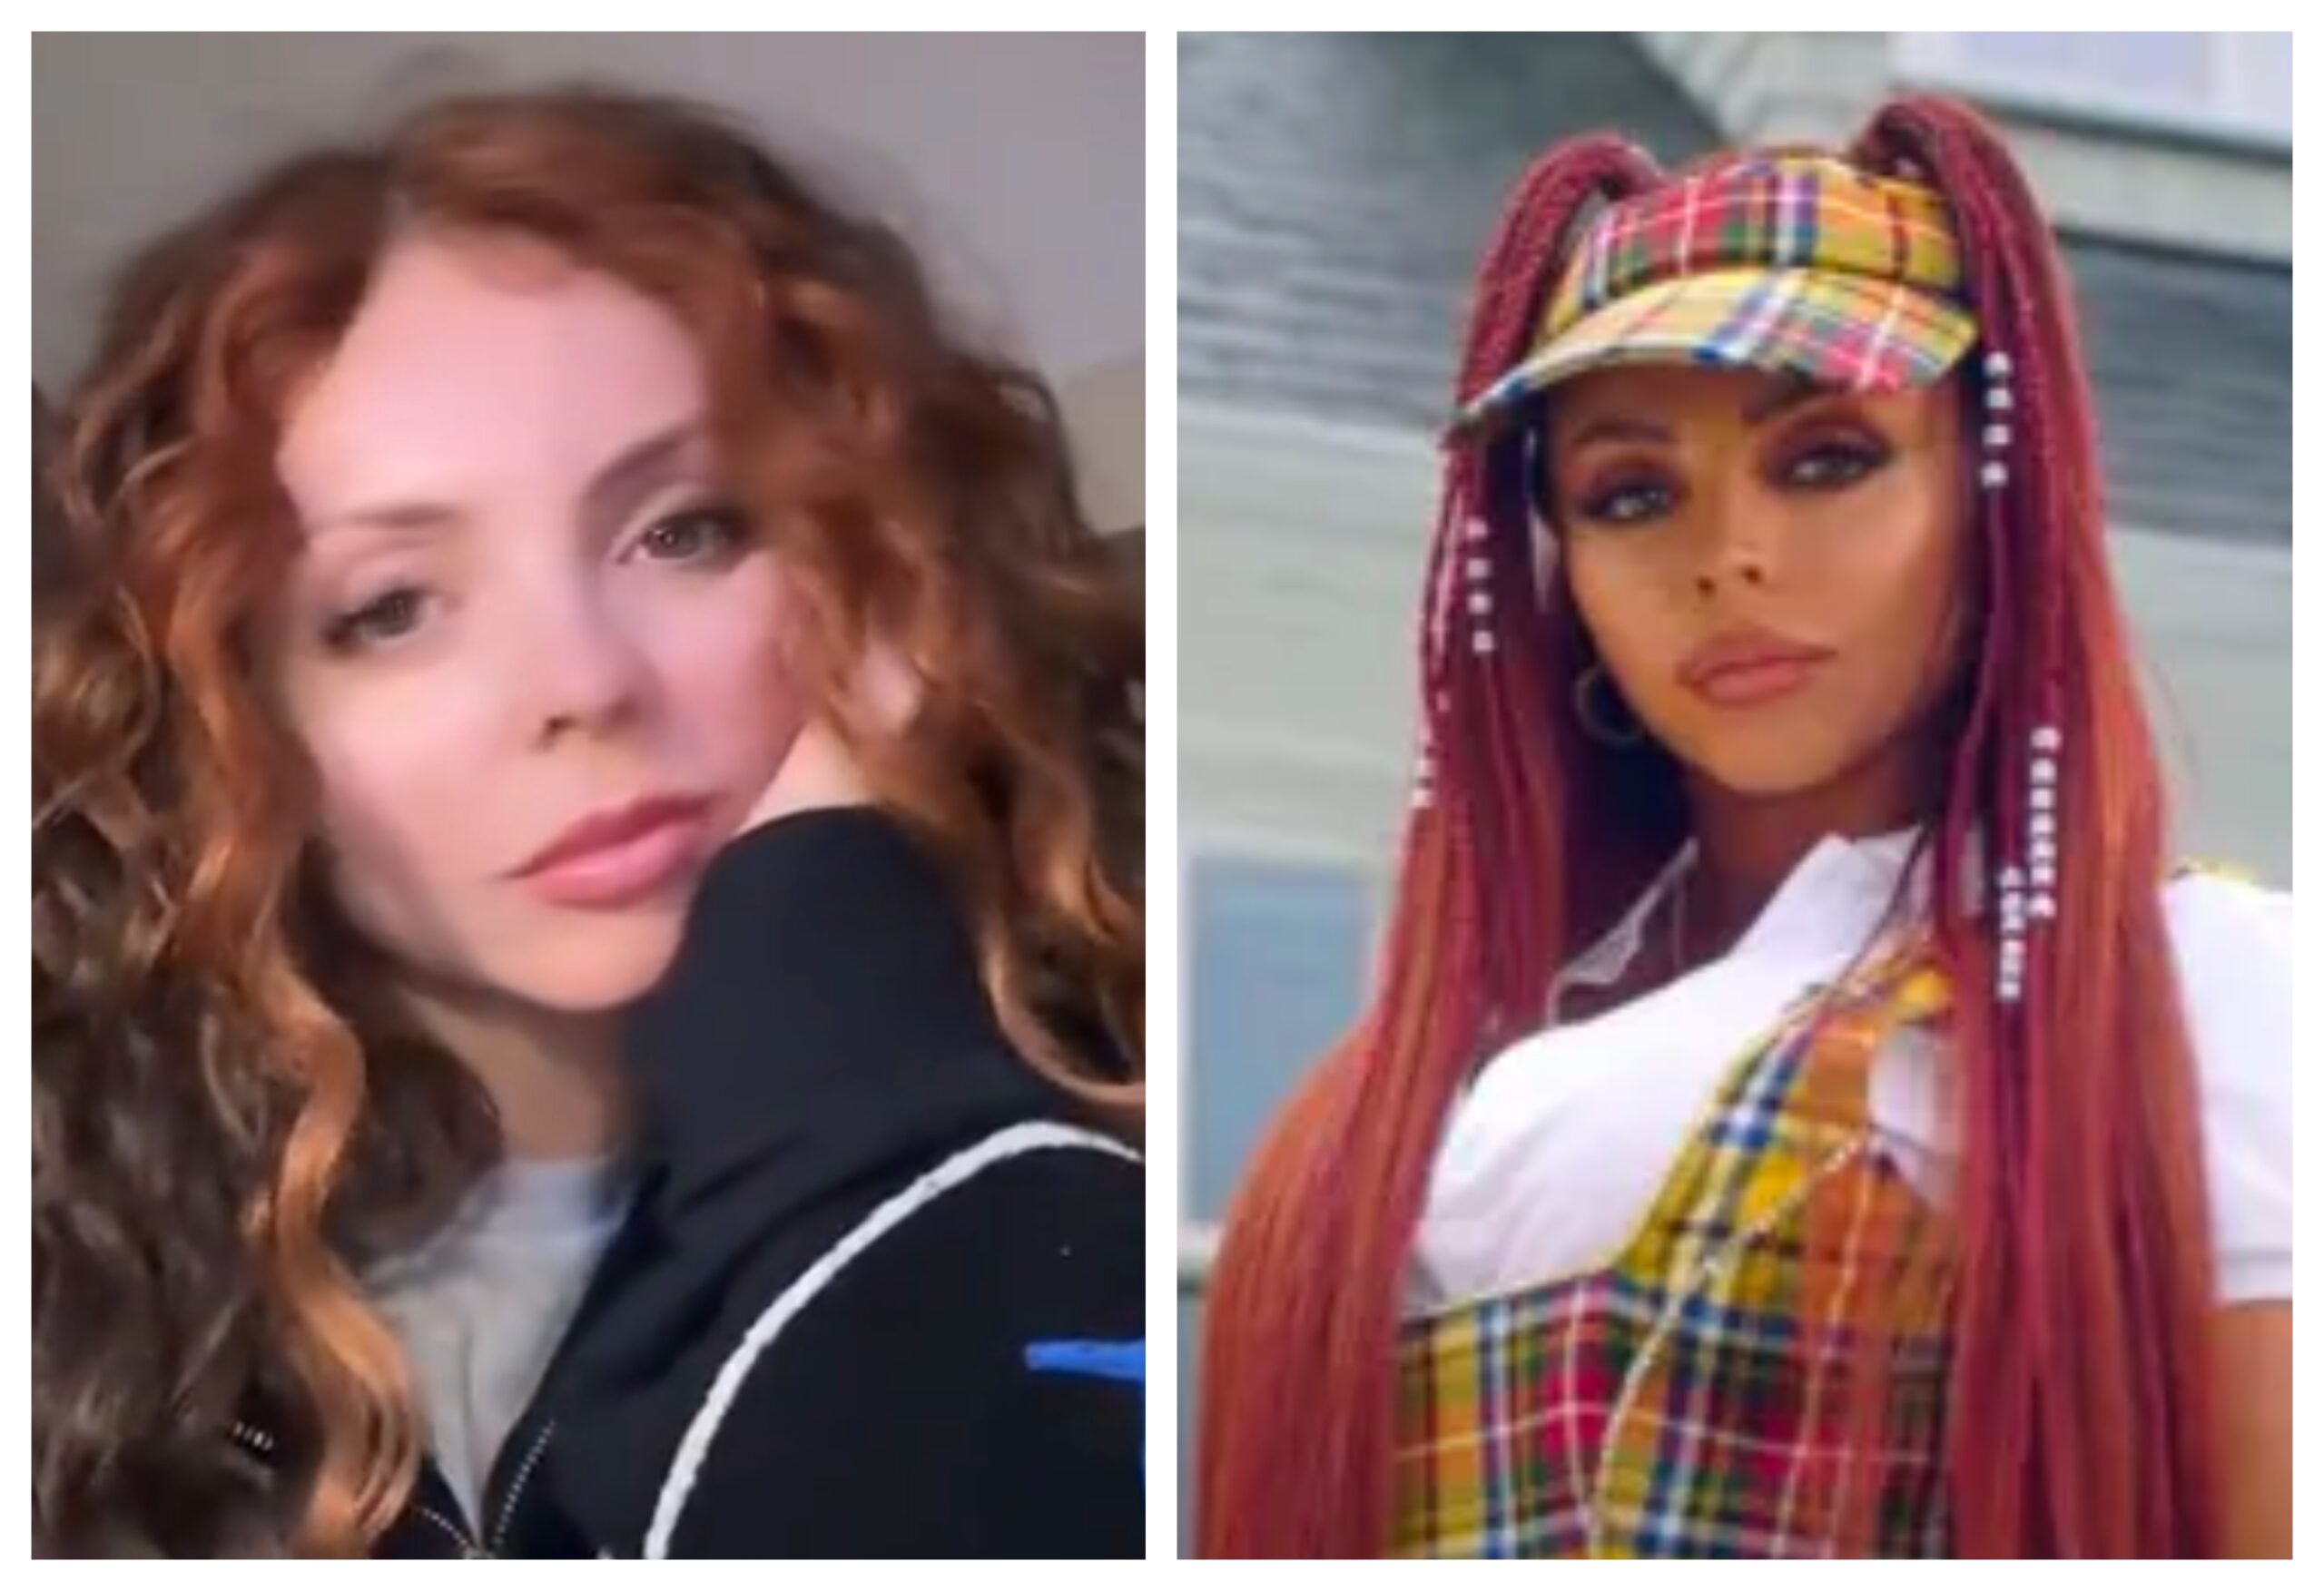 Jesy Nelson Returns to Social Media with ‘Silent Night’ Cover, Goes Viral for…Appearance